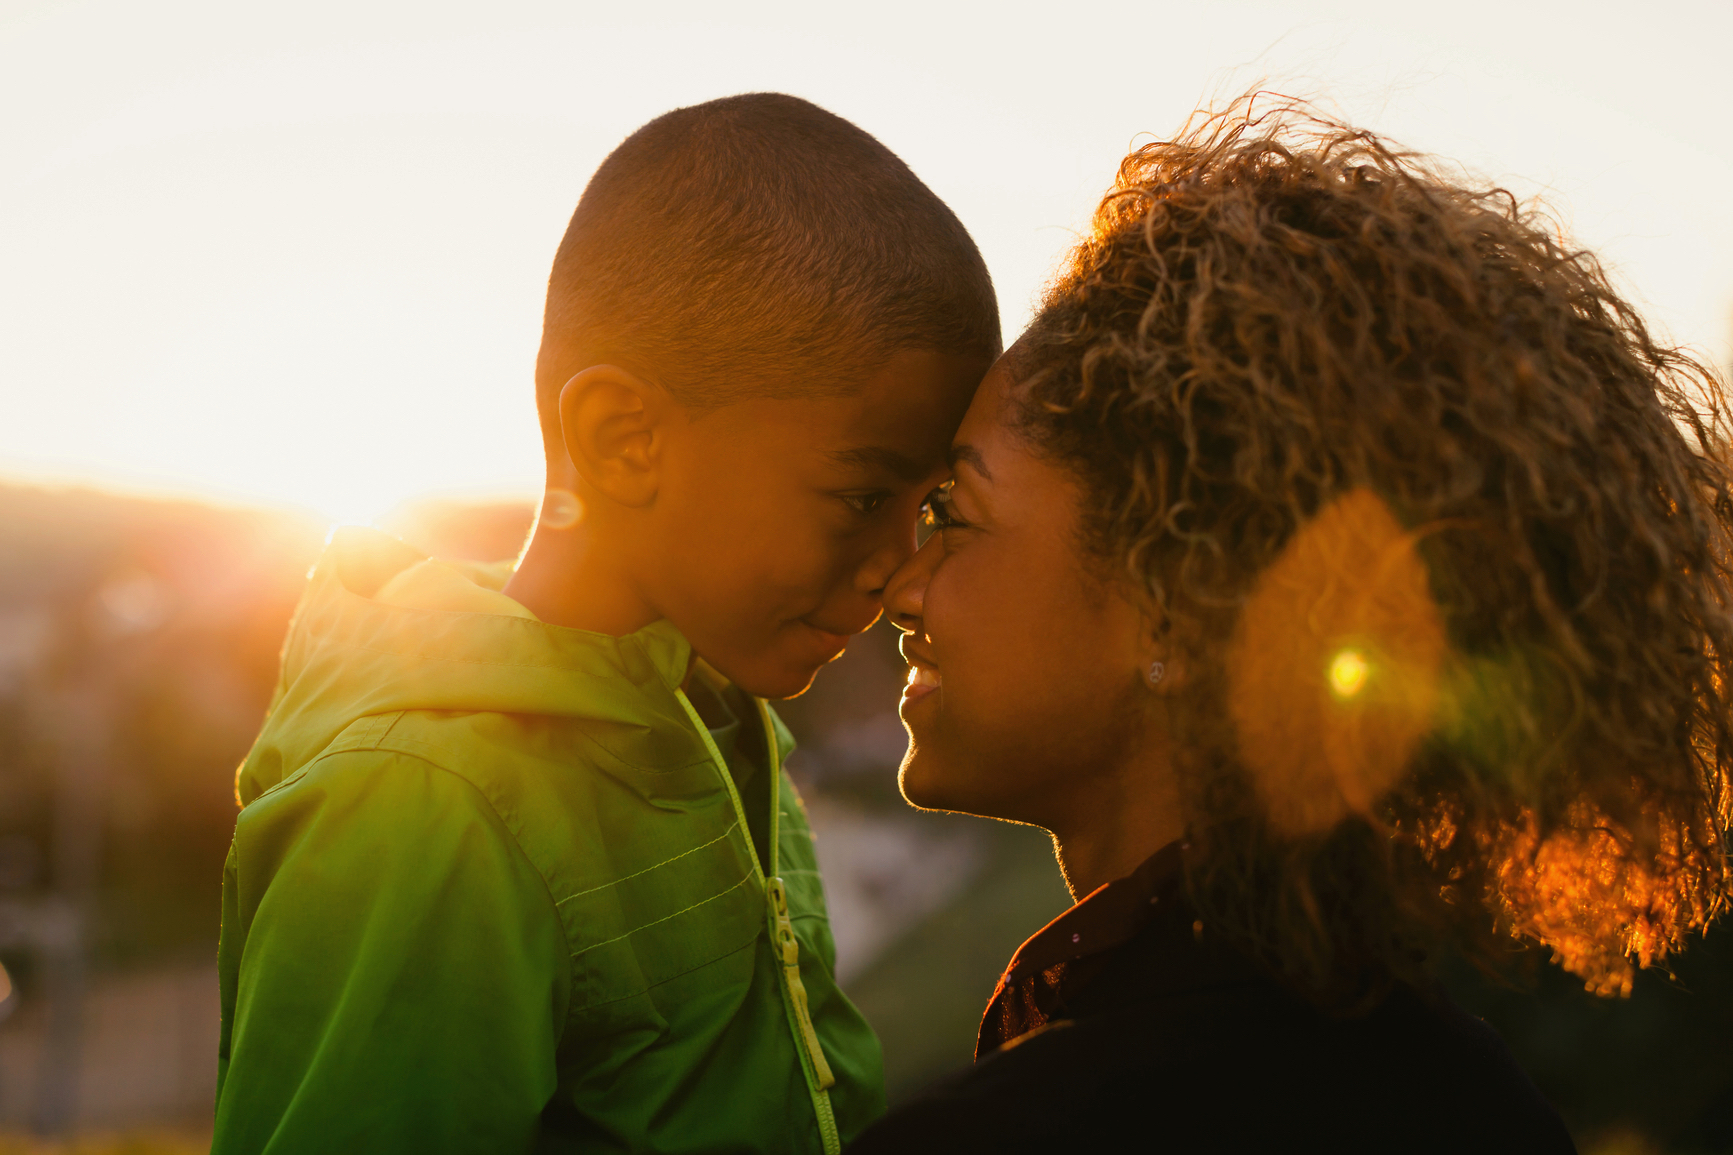 A woman and child embracing and touching foreheads while the sun sets in the background